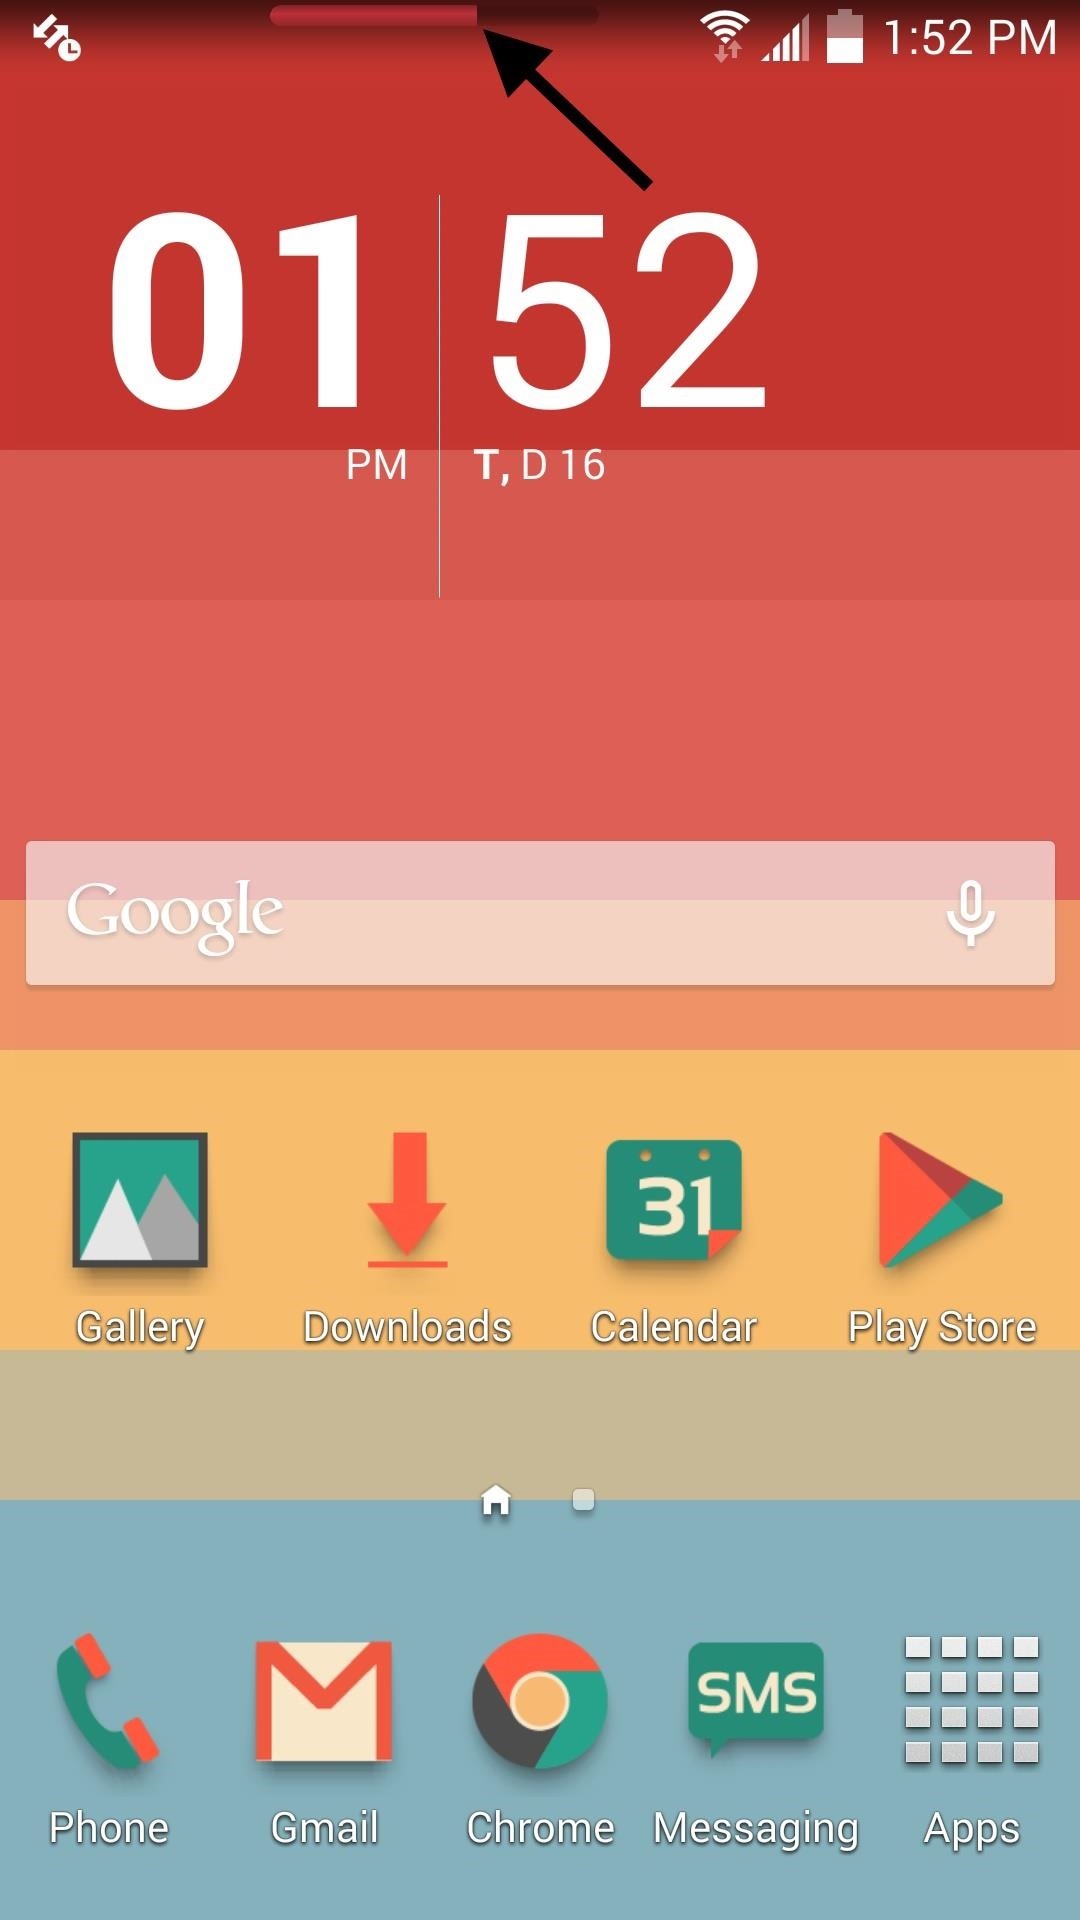 Adjust Display Brightness Right from Your Android's Status Bar (No Root Required)